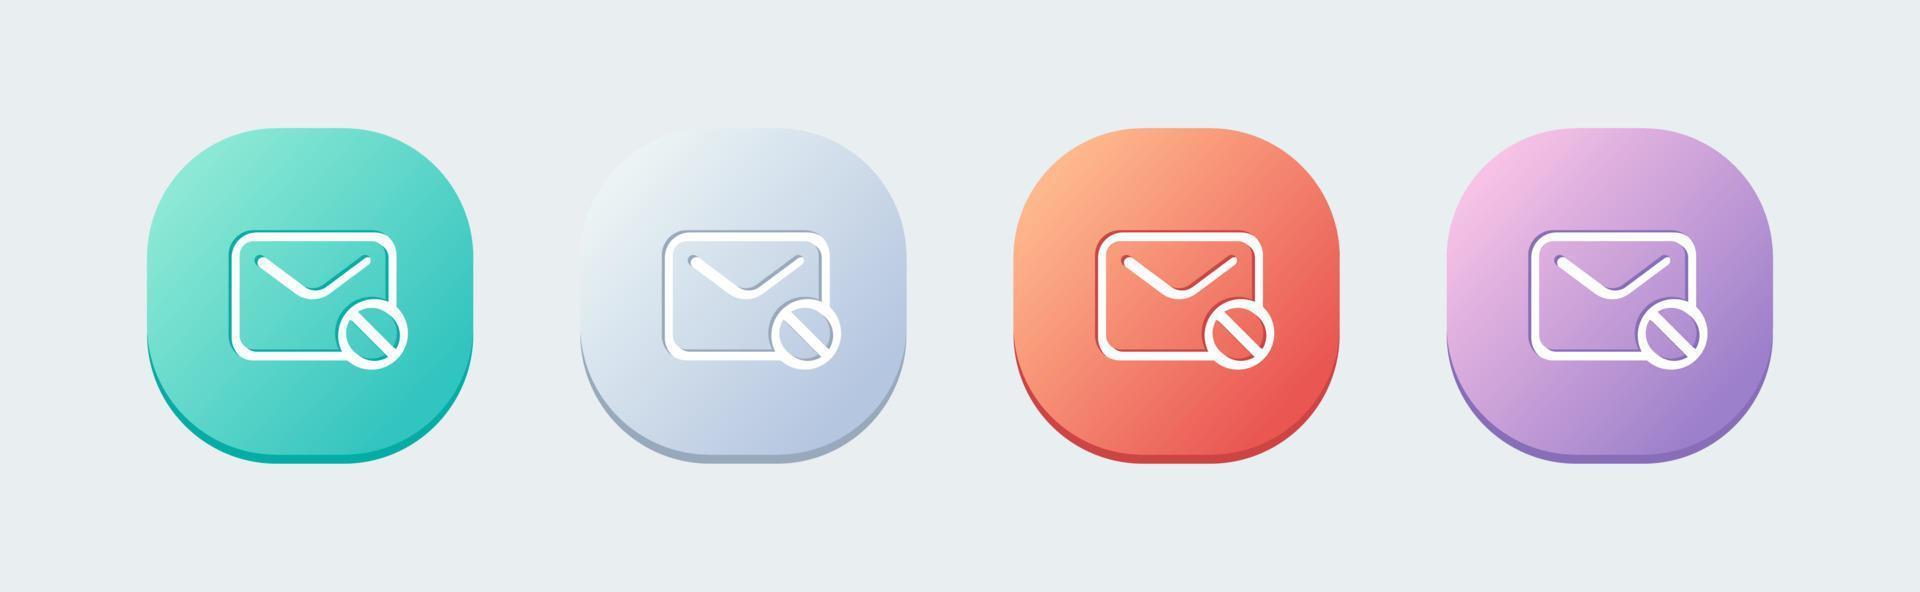 Block message line icon in flat design style. Mail signs vector illustration.